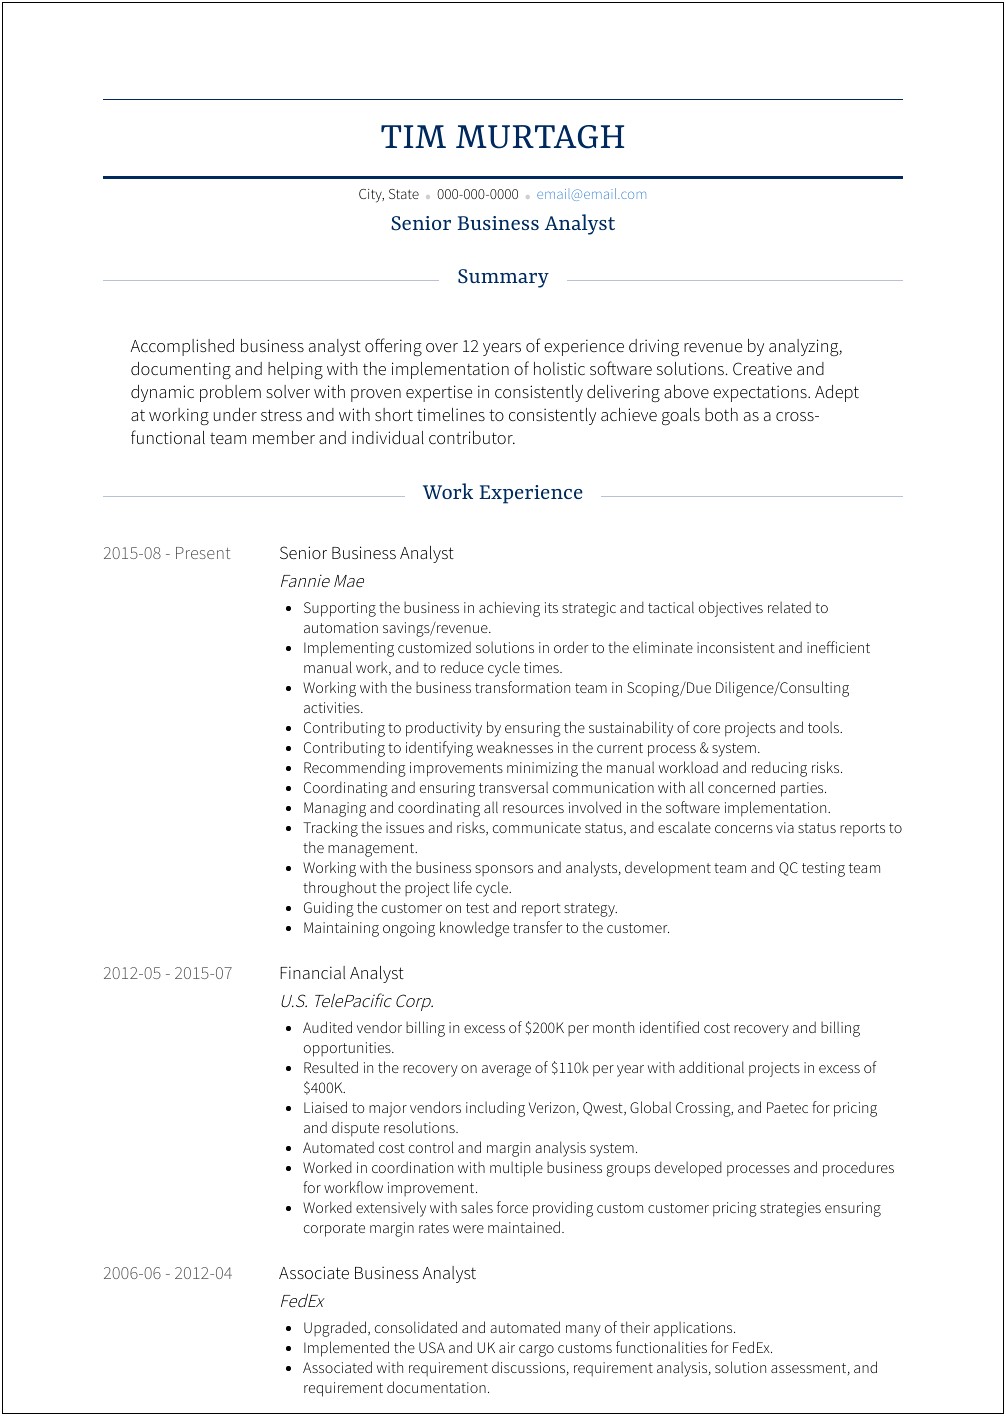 Resume Objective Examples For Business Analyst